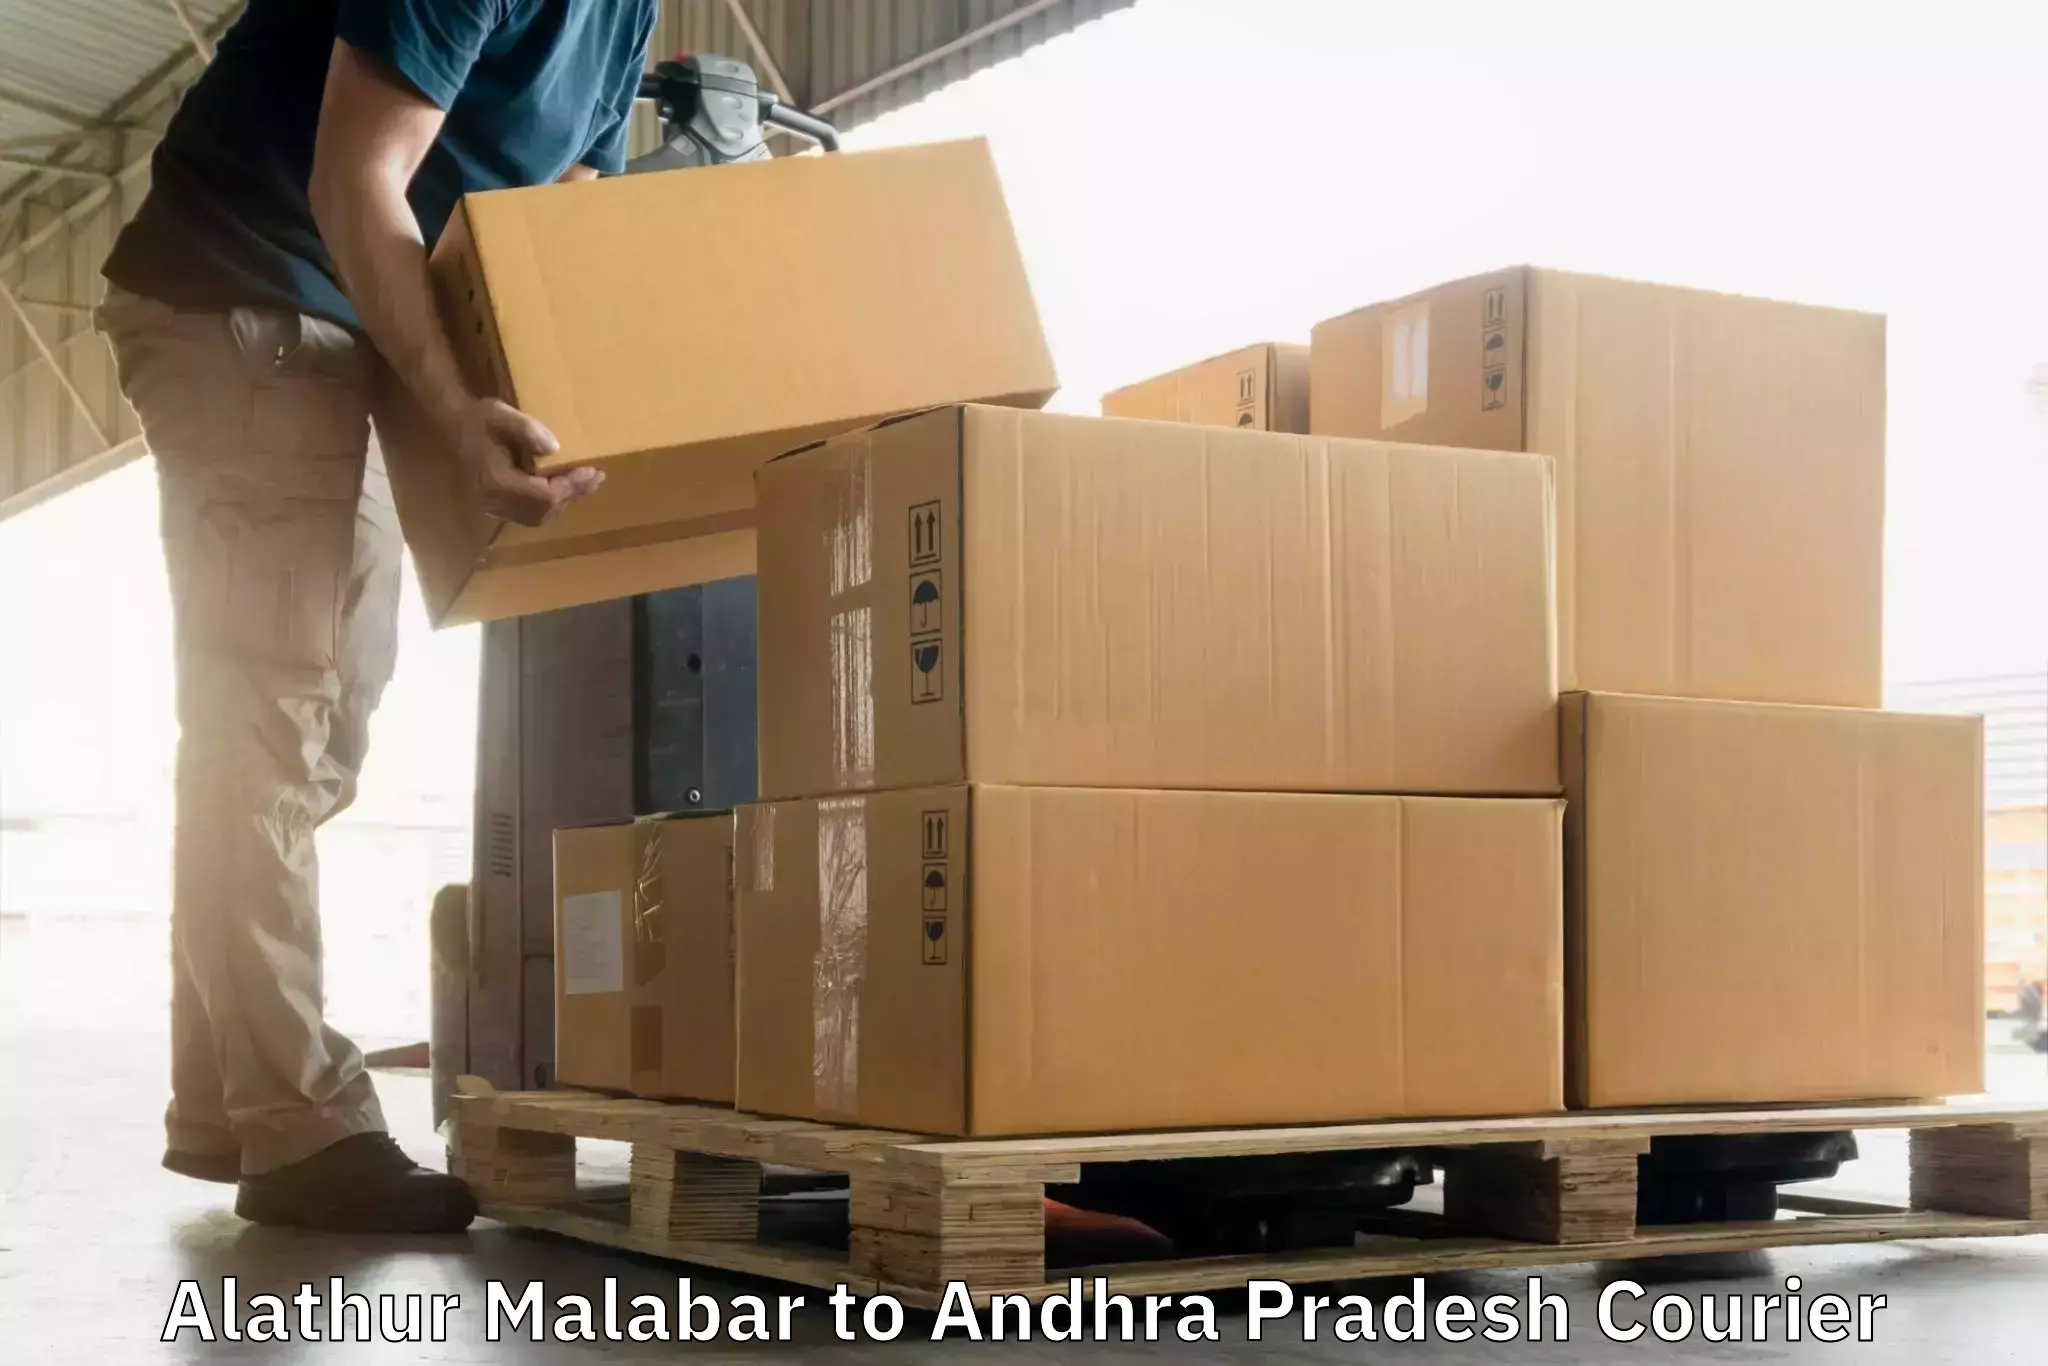 Scalable shipping solutions Alathur Malabar to Visakhapatnam Port